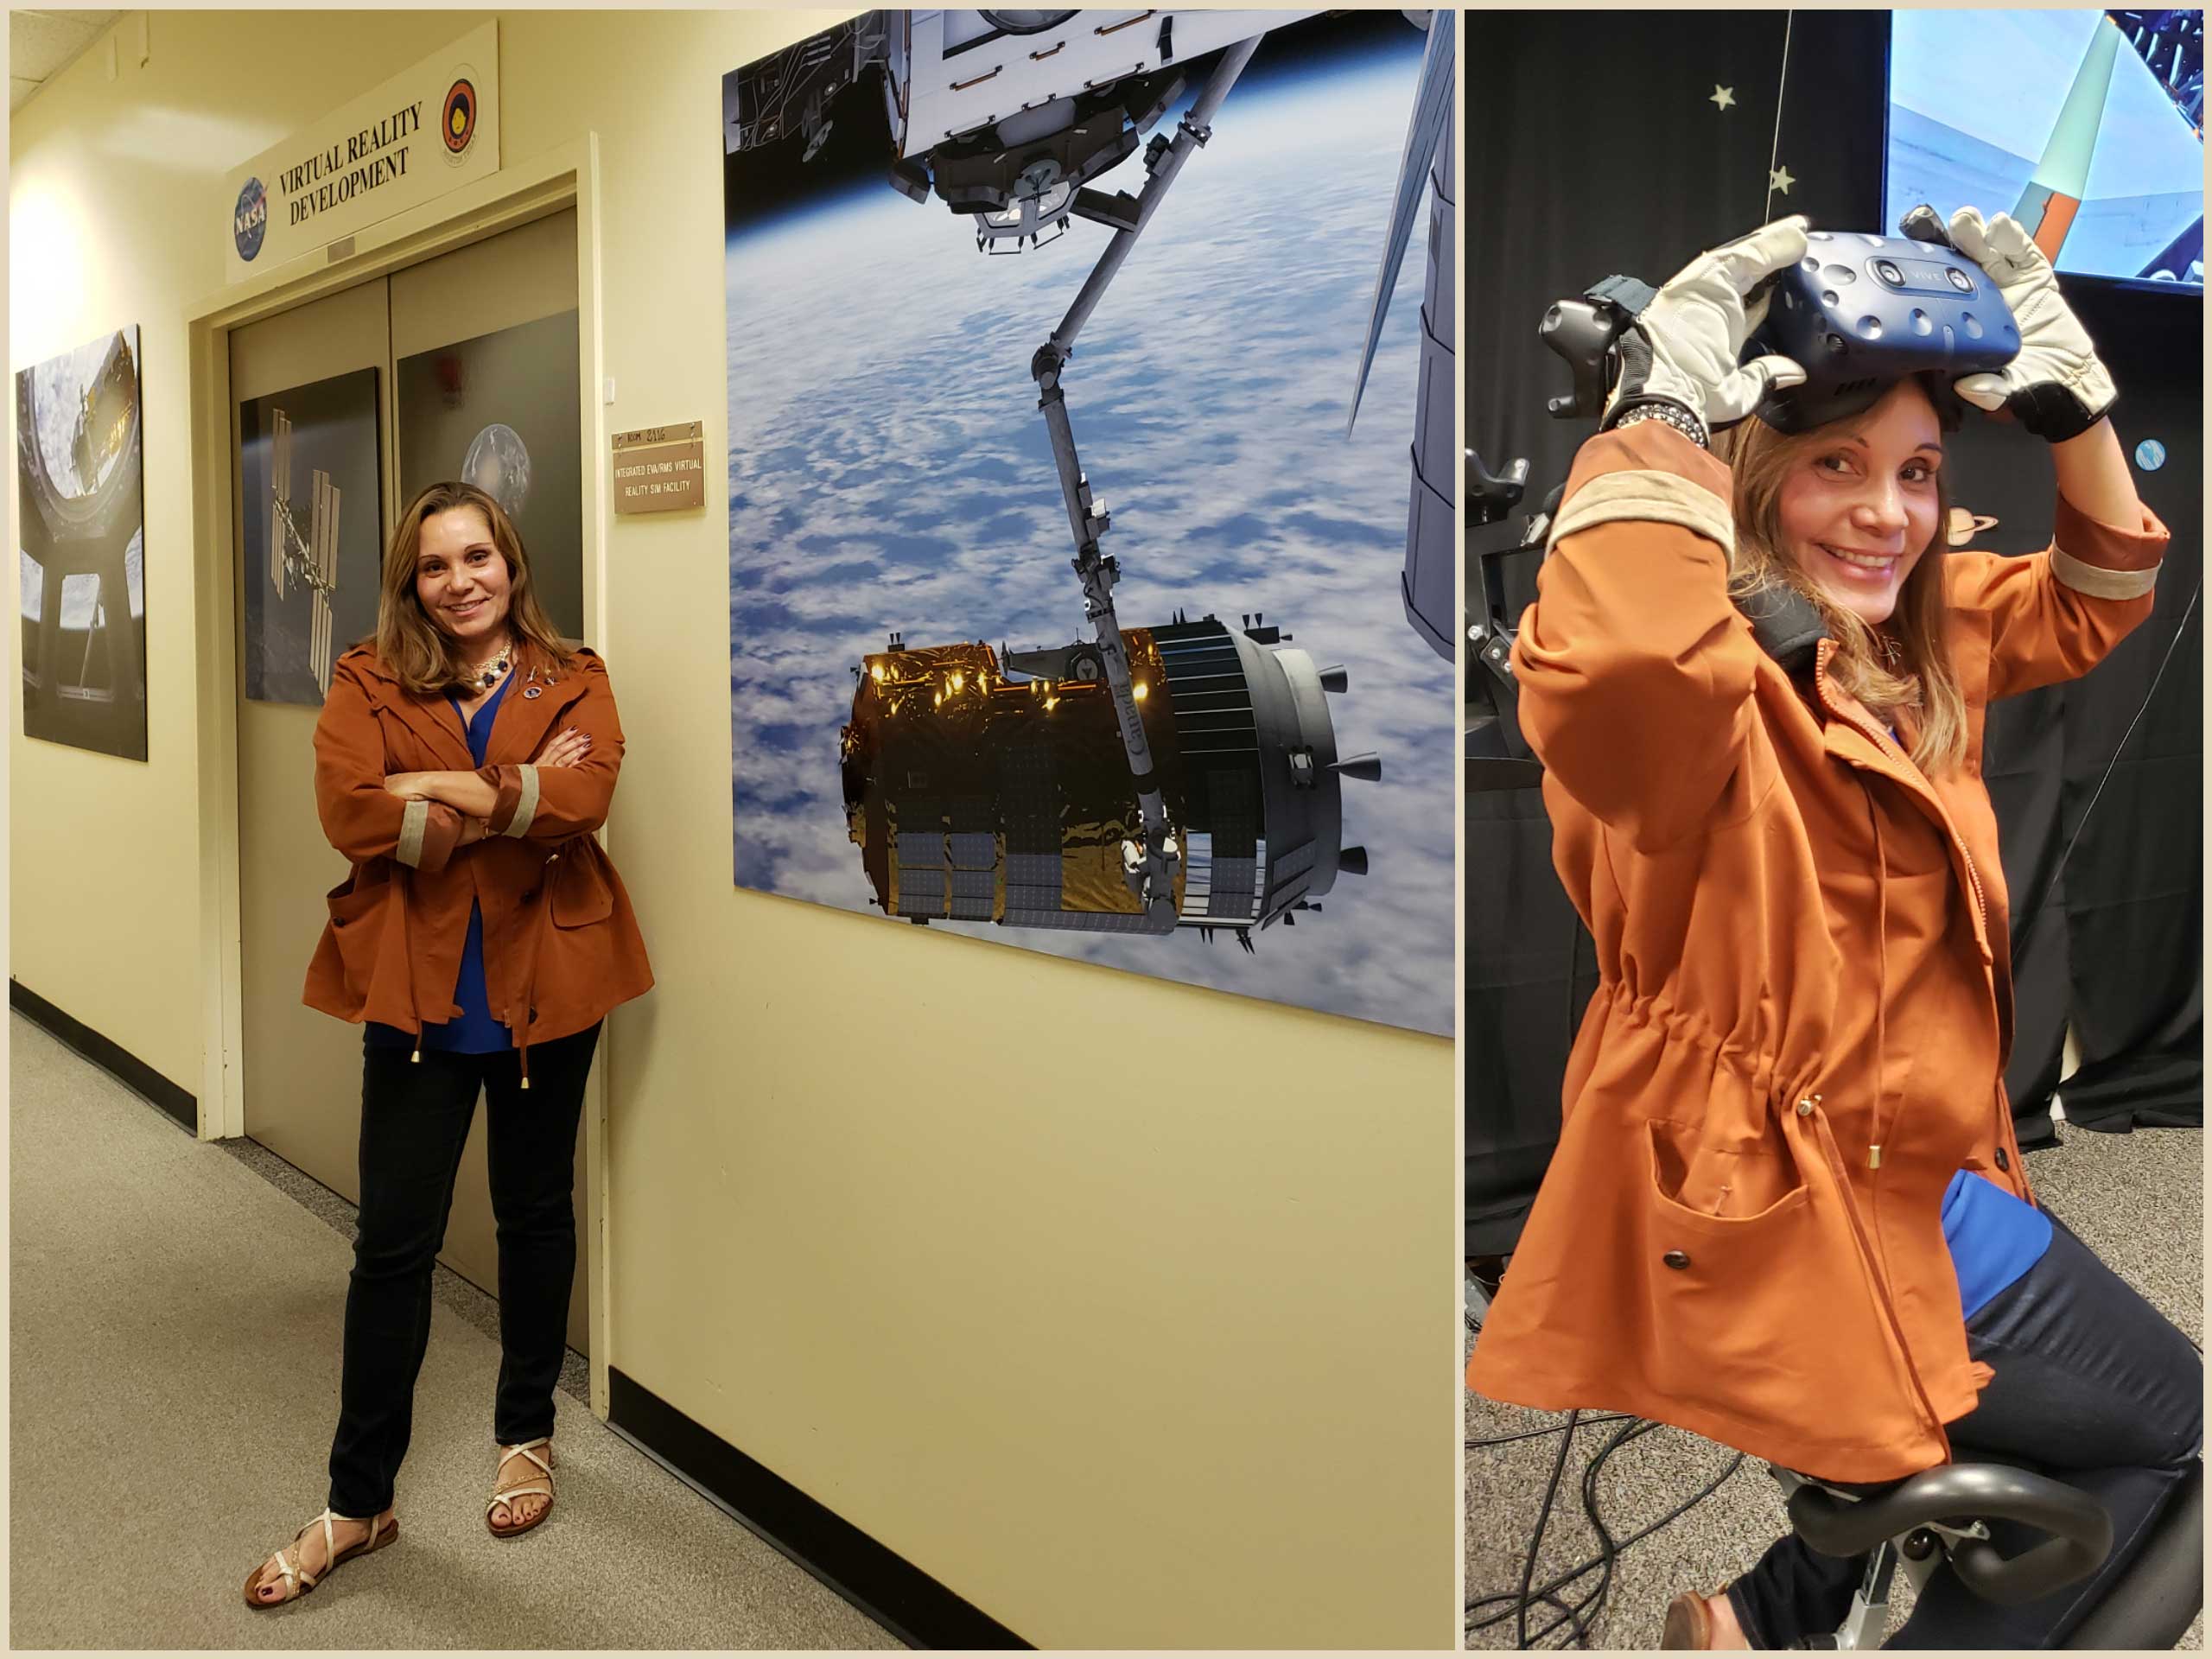 PHOTO: Evelyn Miralles using an HTC Vive virtual reality headset in the Virtual Reality Lab, the Official Astronaut Training Facility at NASA's Johnson Space Center. Photo courtesy of Evelyn Miralles.